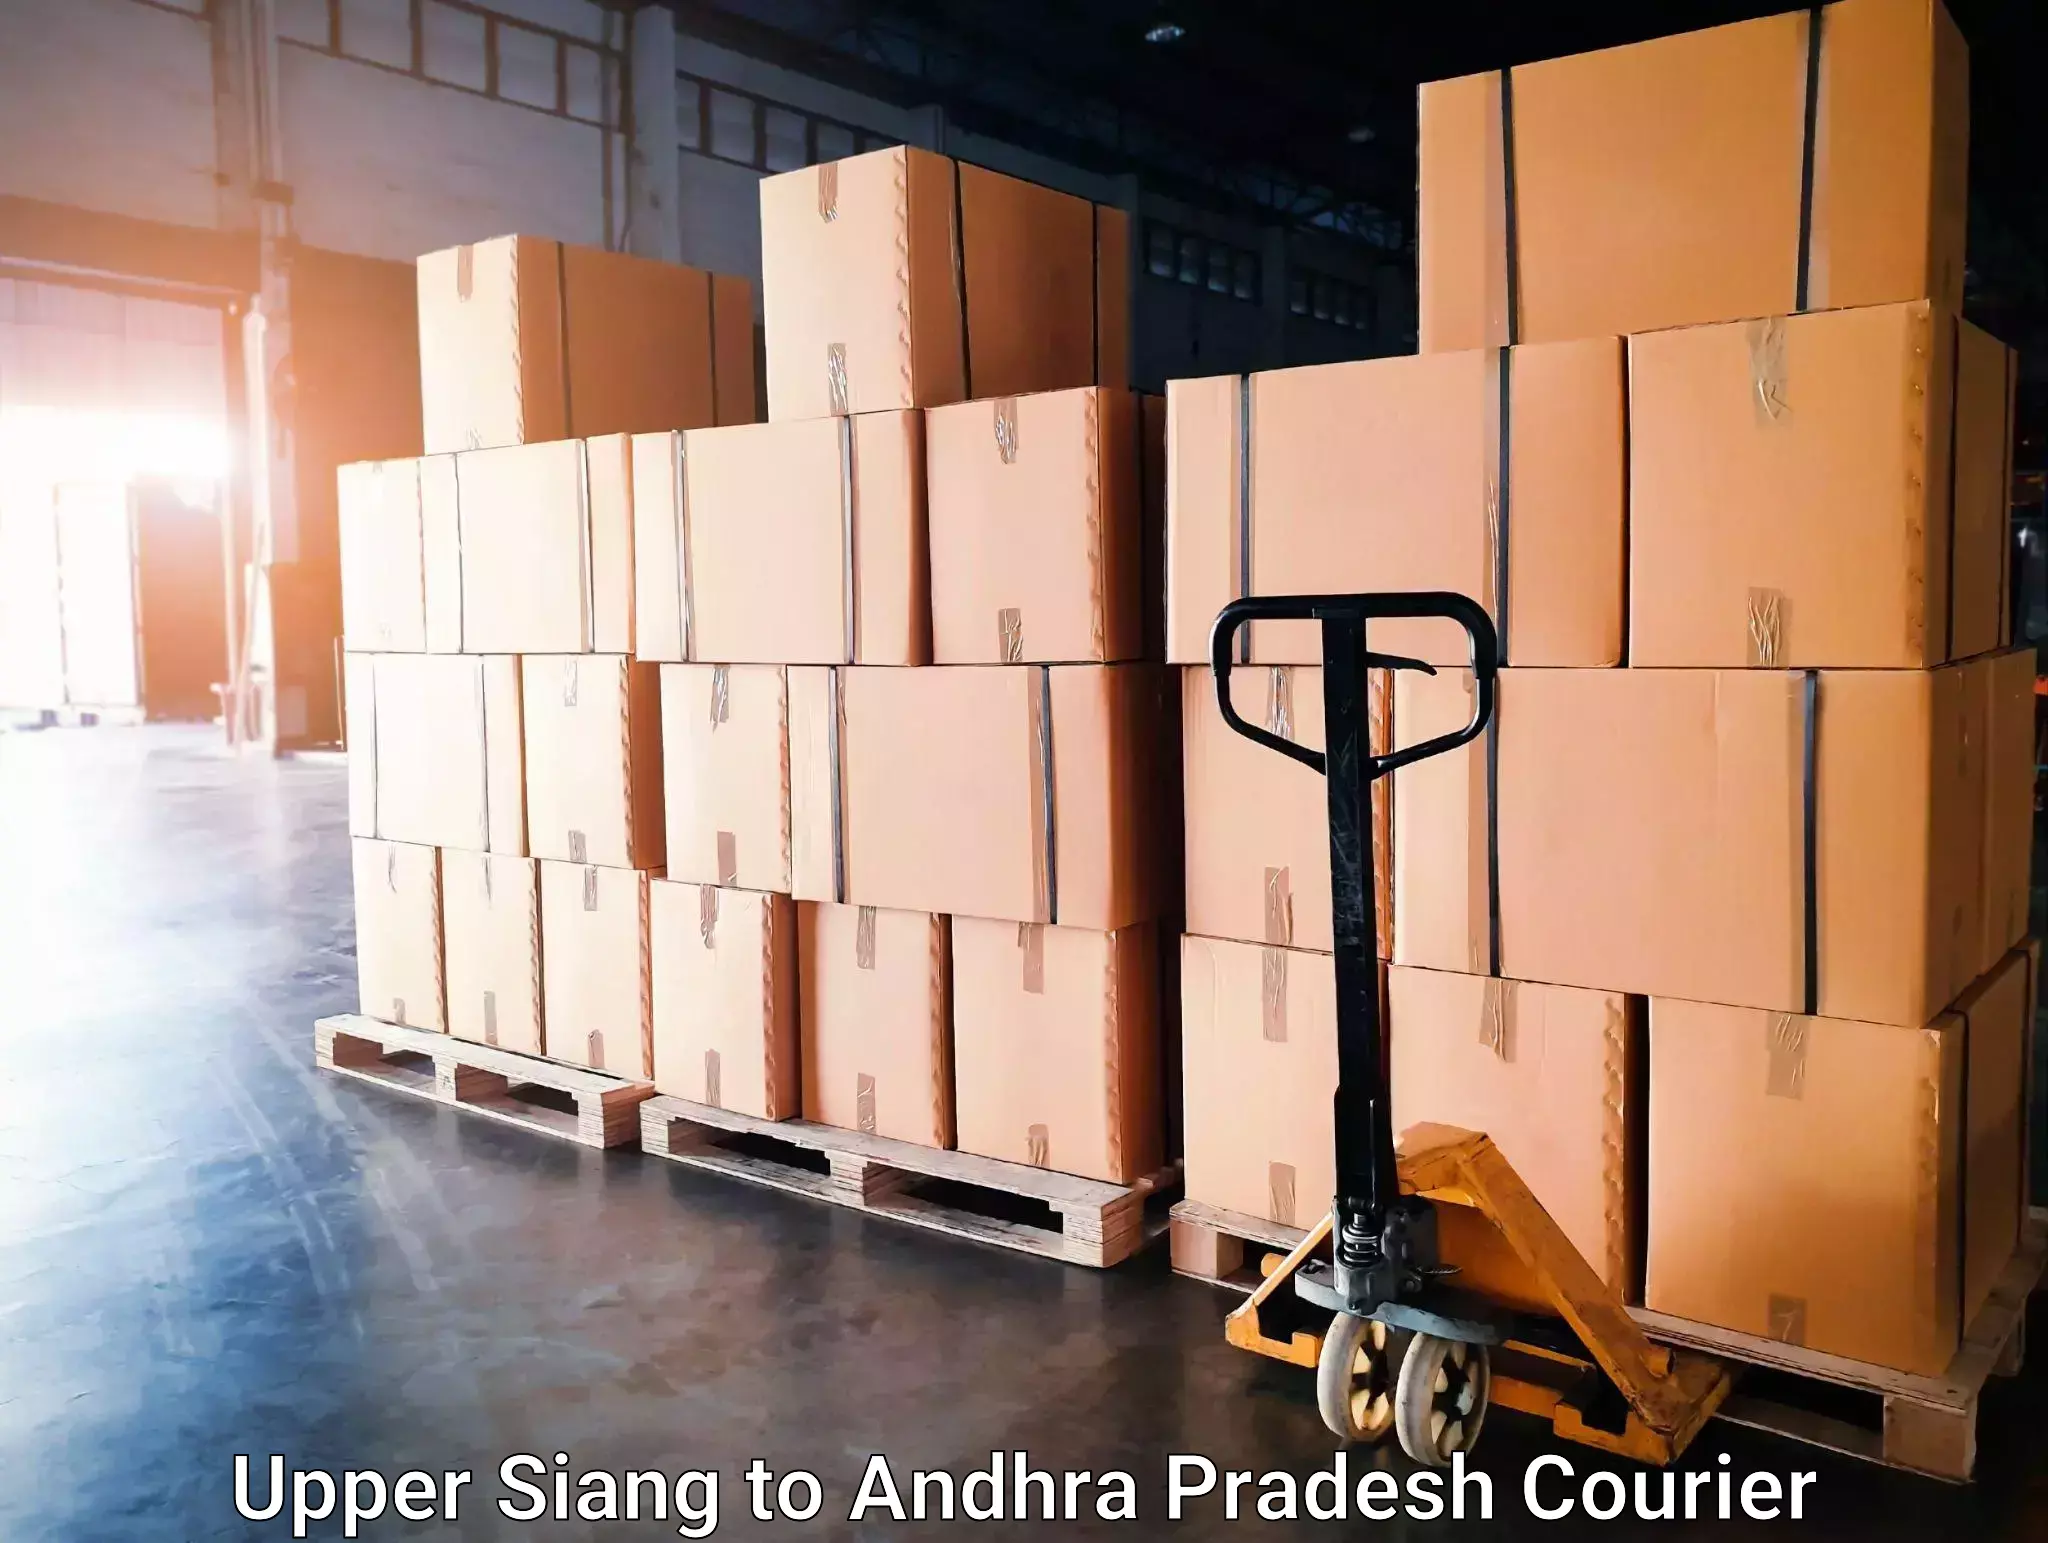 24-hour courier service Upper Siang to Andhra Pradesh